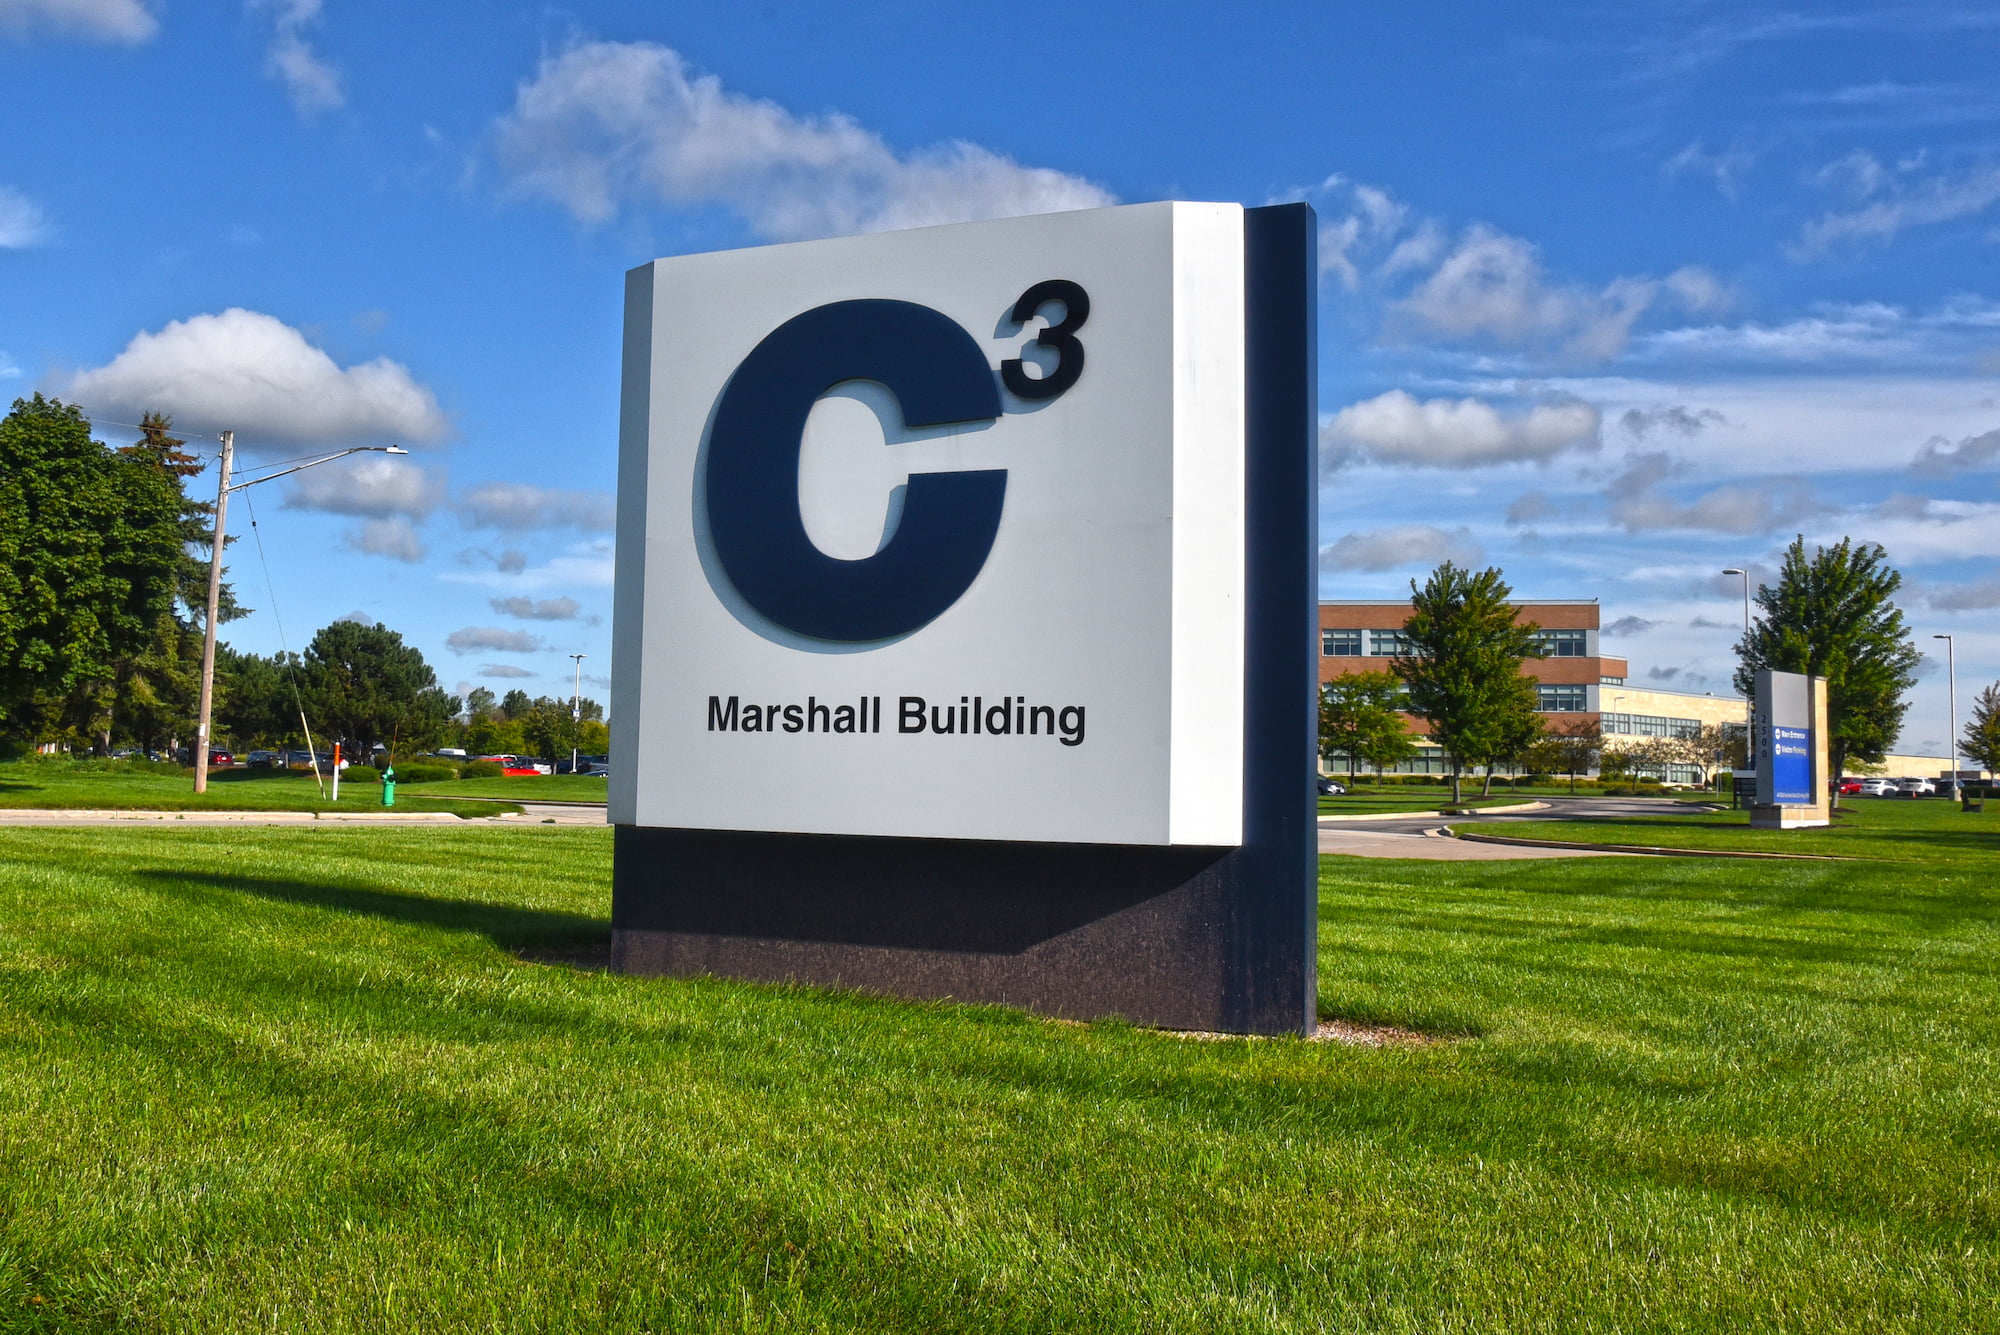 C3 Marshall Building sign with building in the background